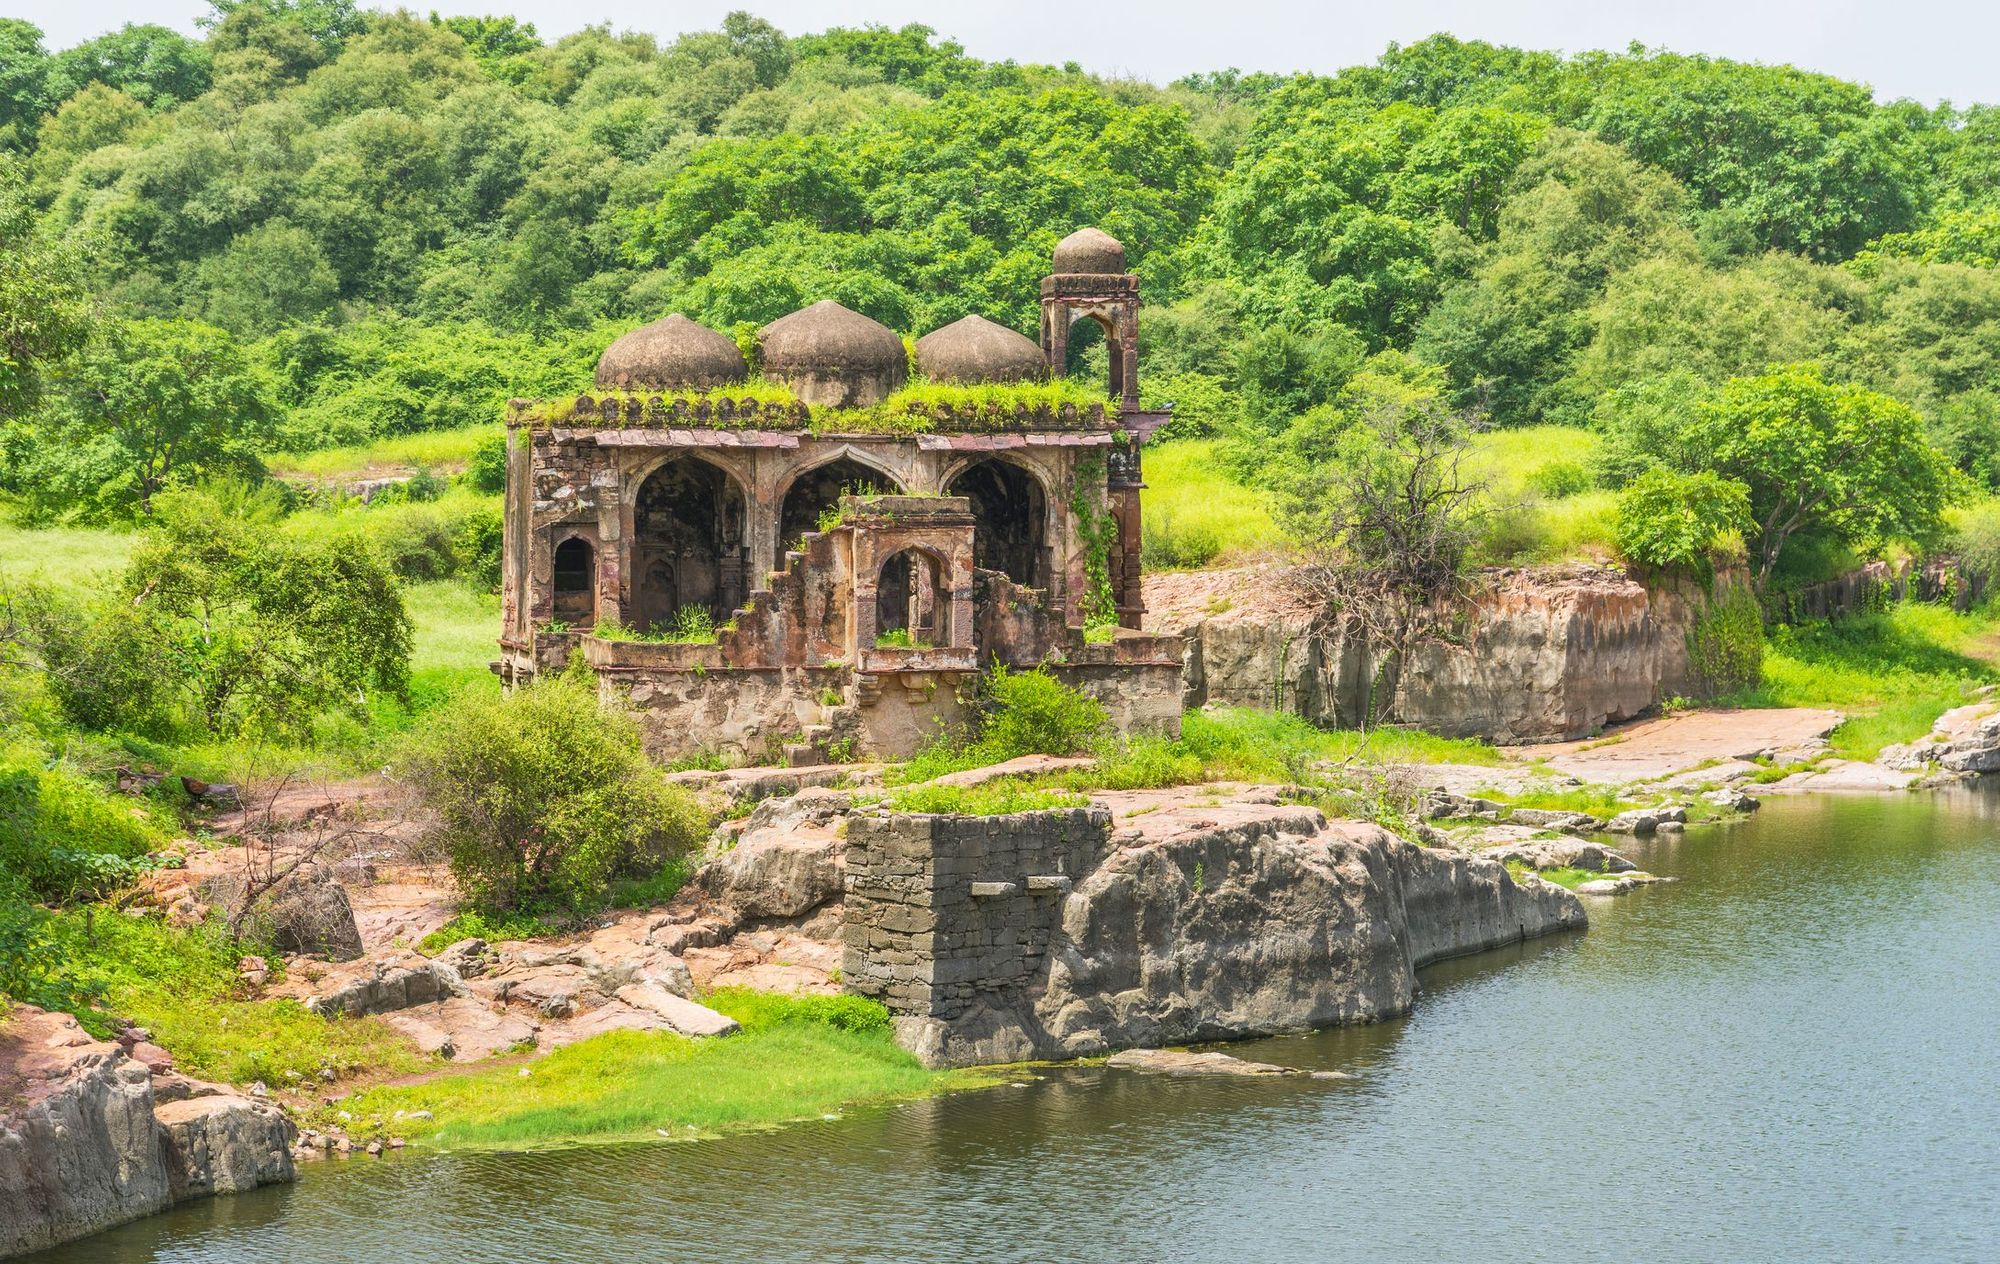 Abandoned mosque in Ranthambore Fort, Rajasthan, India.